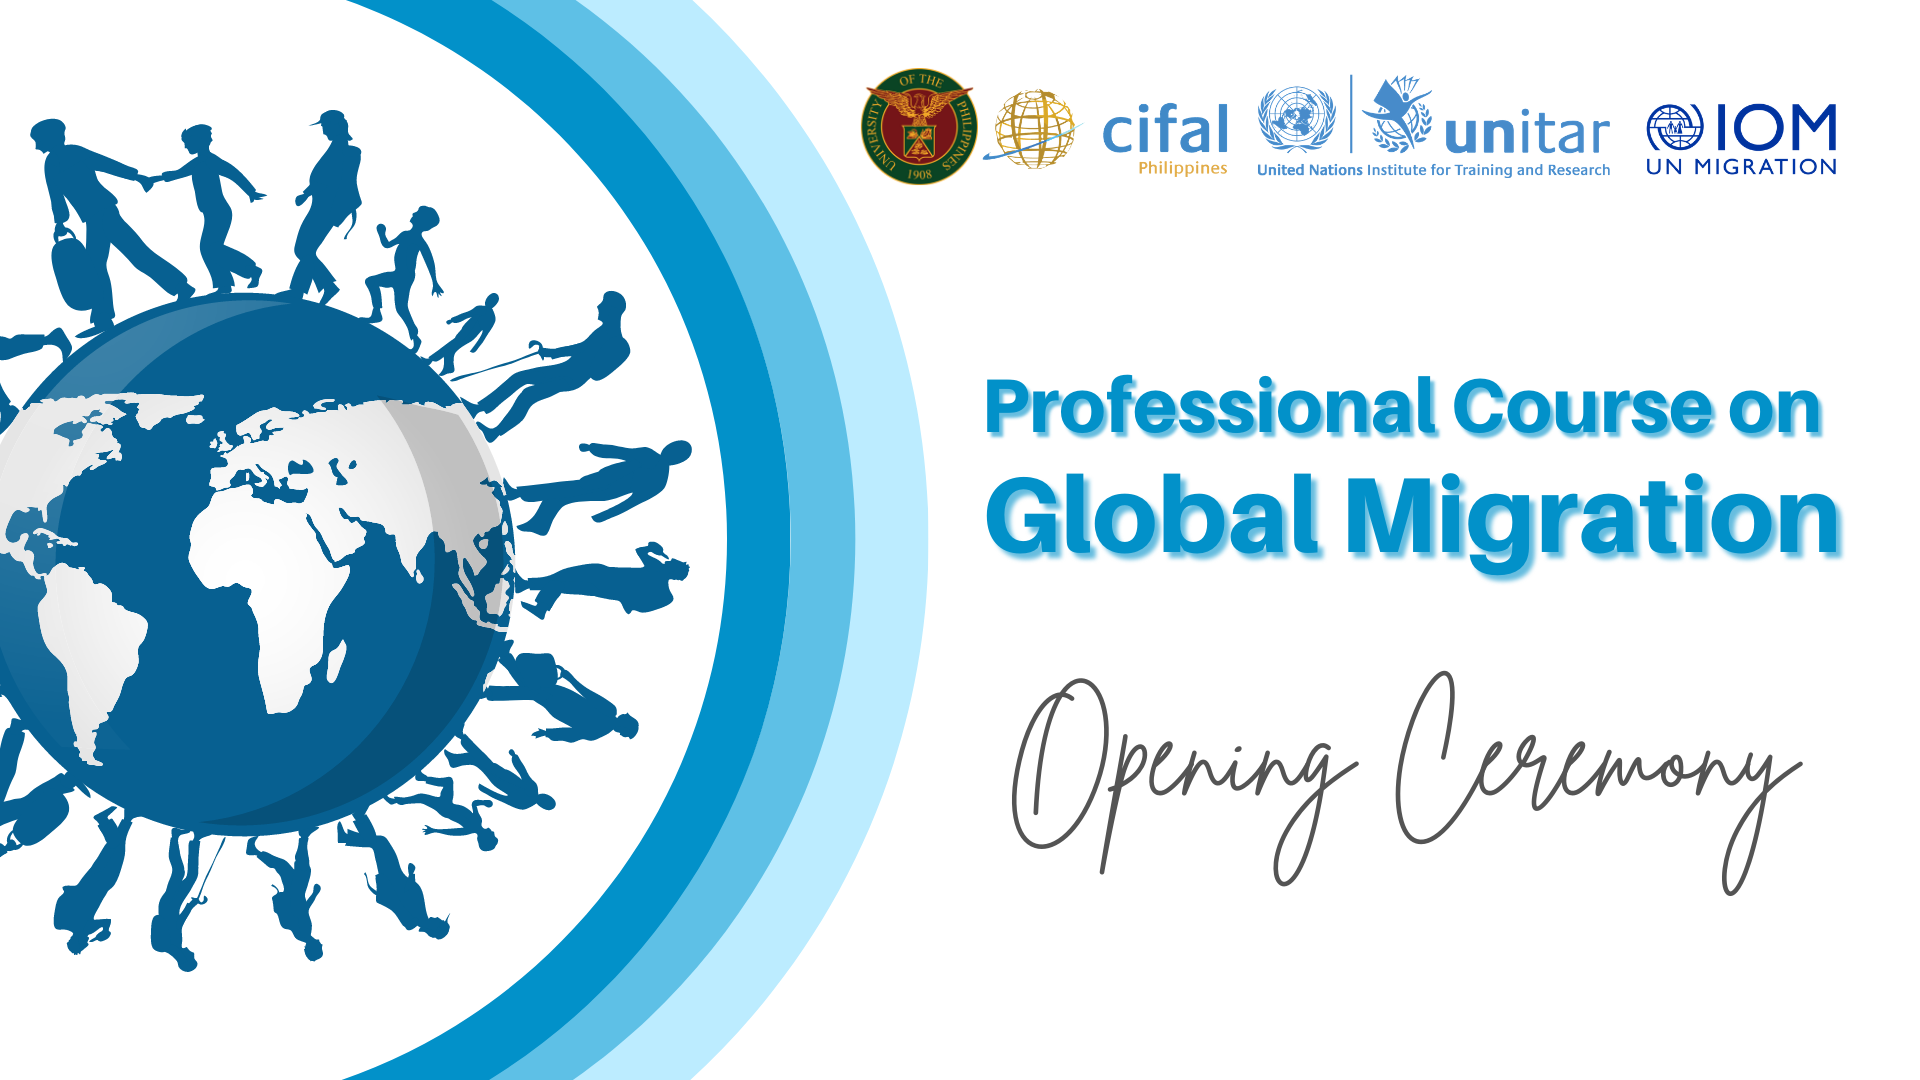 UP-CIFAL Philippines opens the first online Professional Course on Global Migration